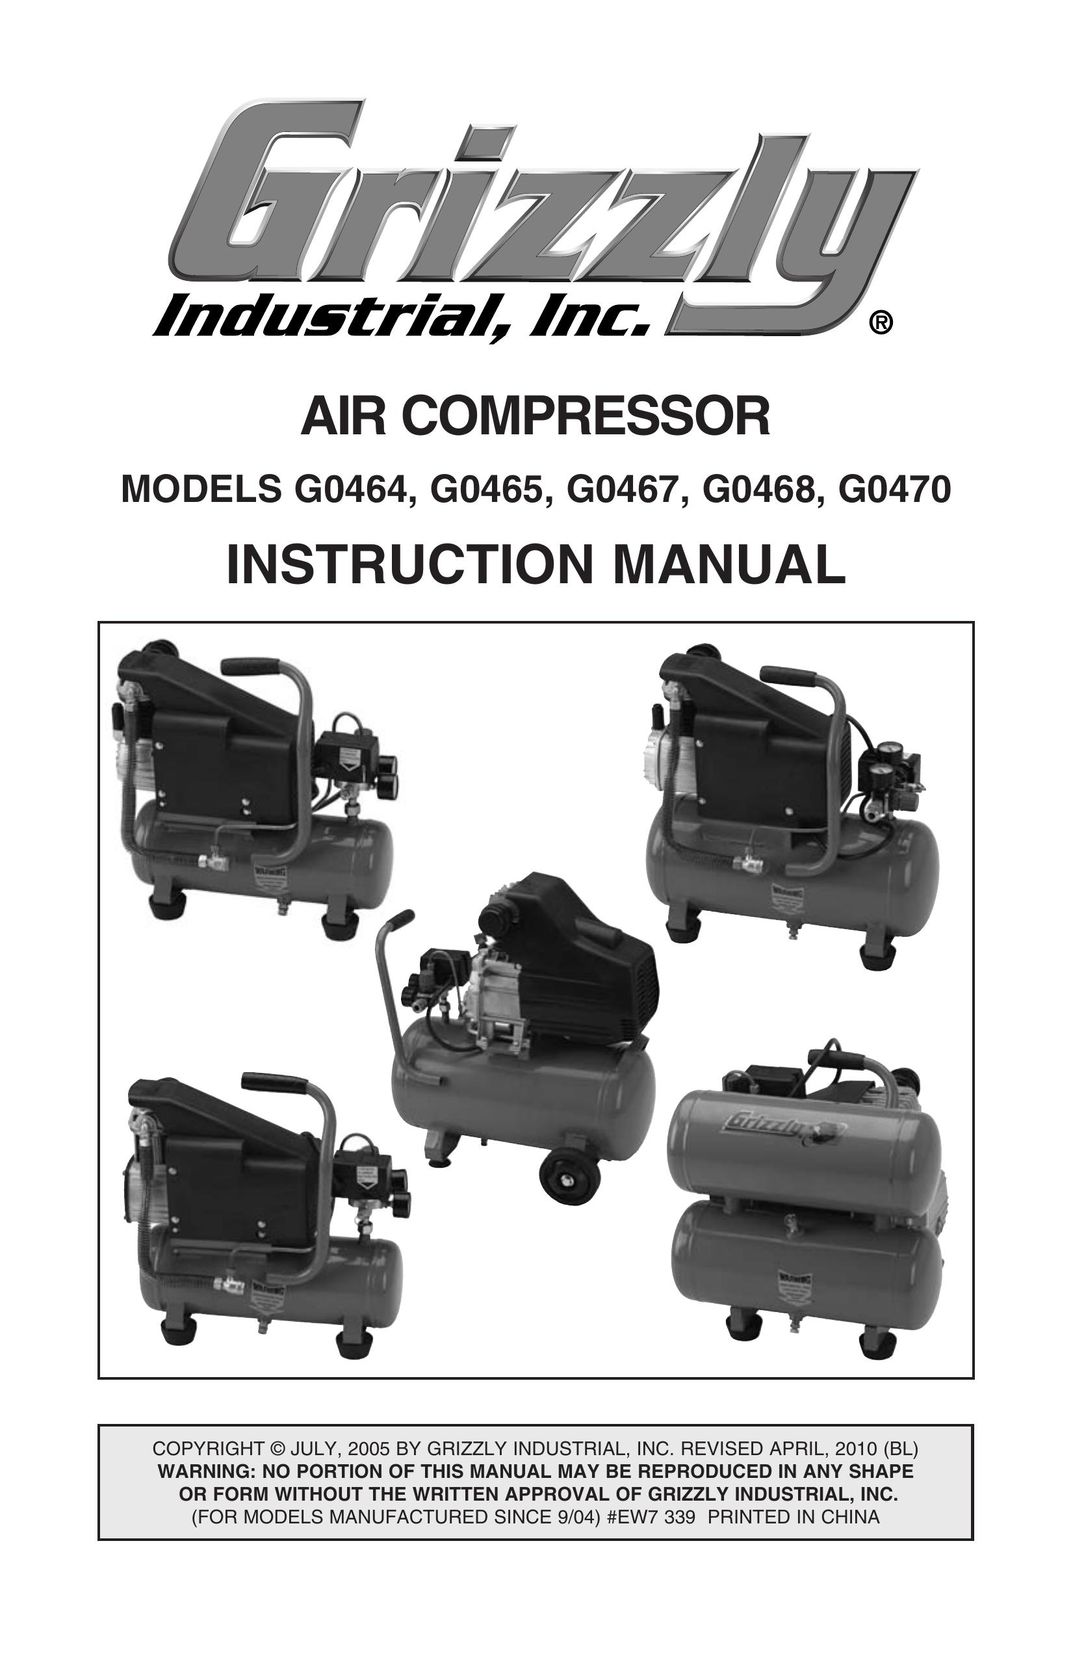 Grizzly G0465 Air Compressor User Manual